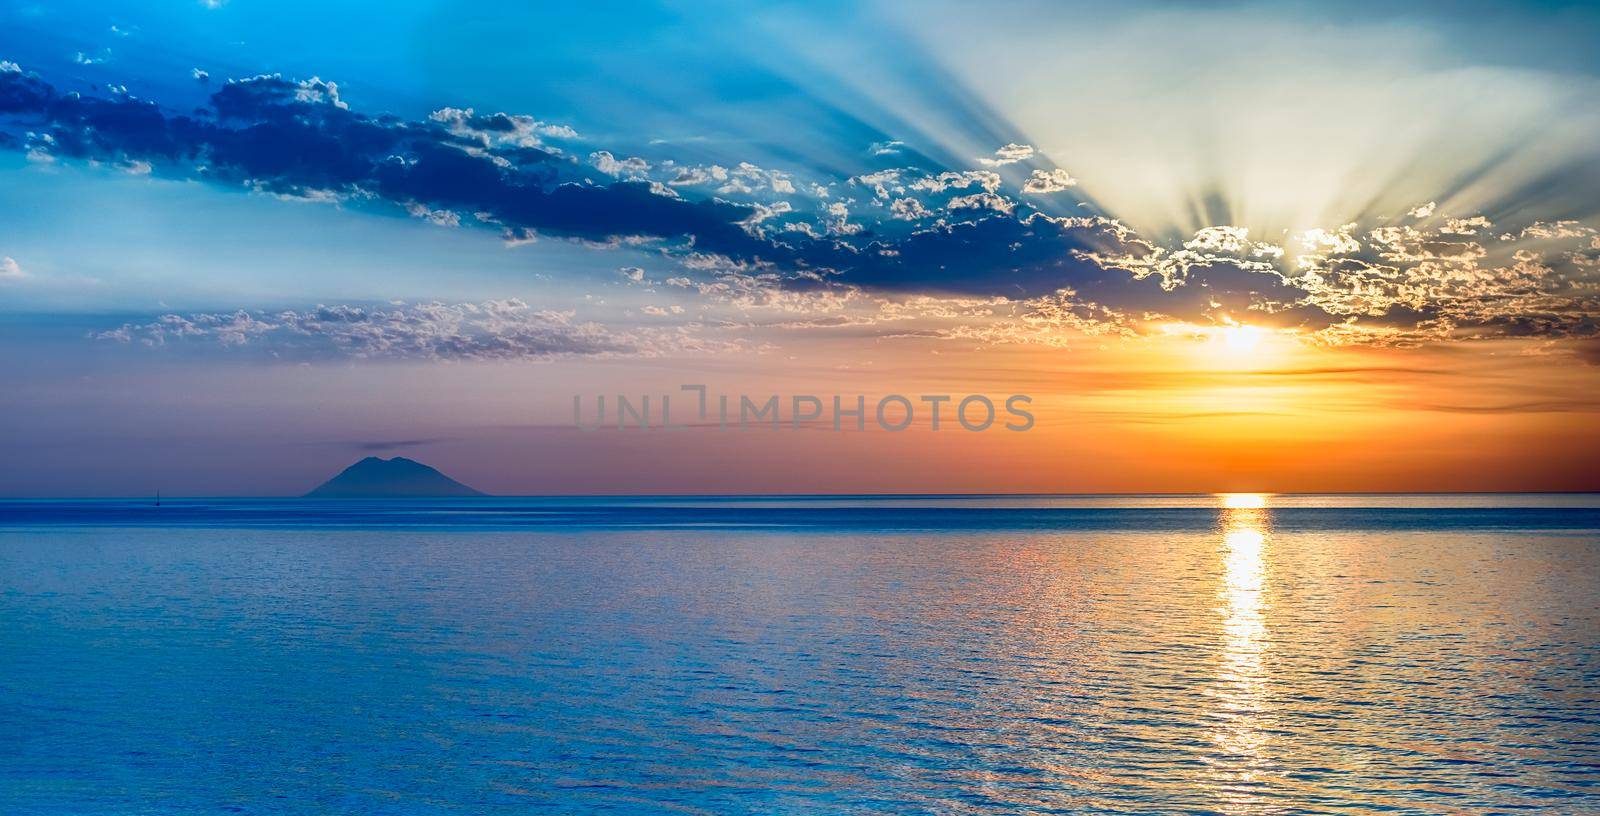 Scenic sunset with view of the Stromboli Volcano from Tropea, a seaside resort located on the Gulf of Saint Euphemia, part of the Tyrrhenian Sea, Calabria, Italy